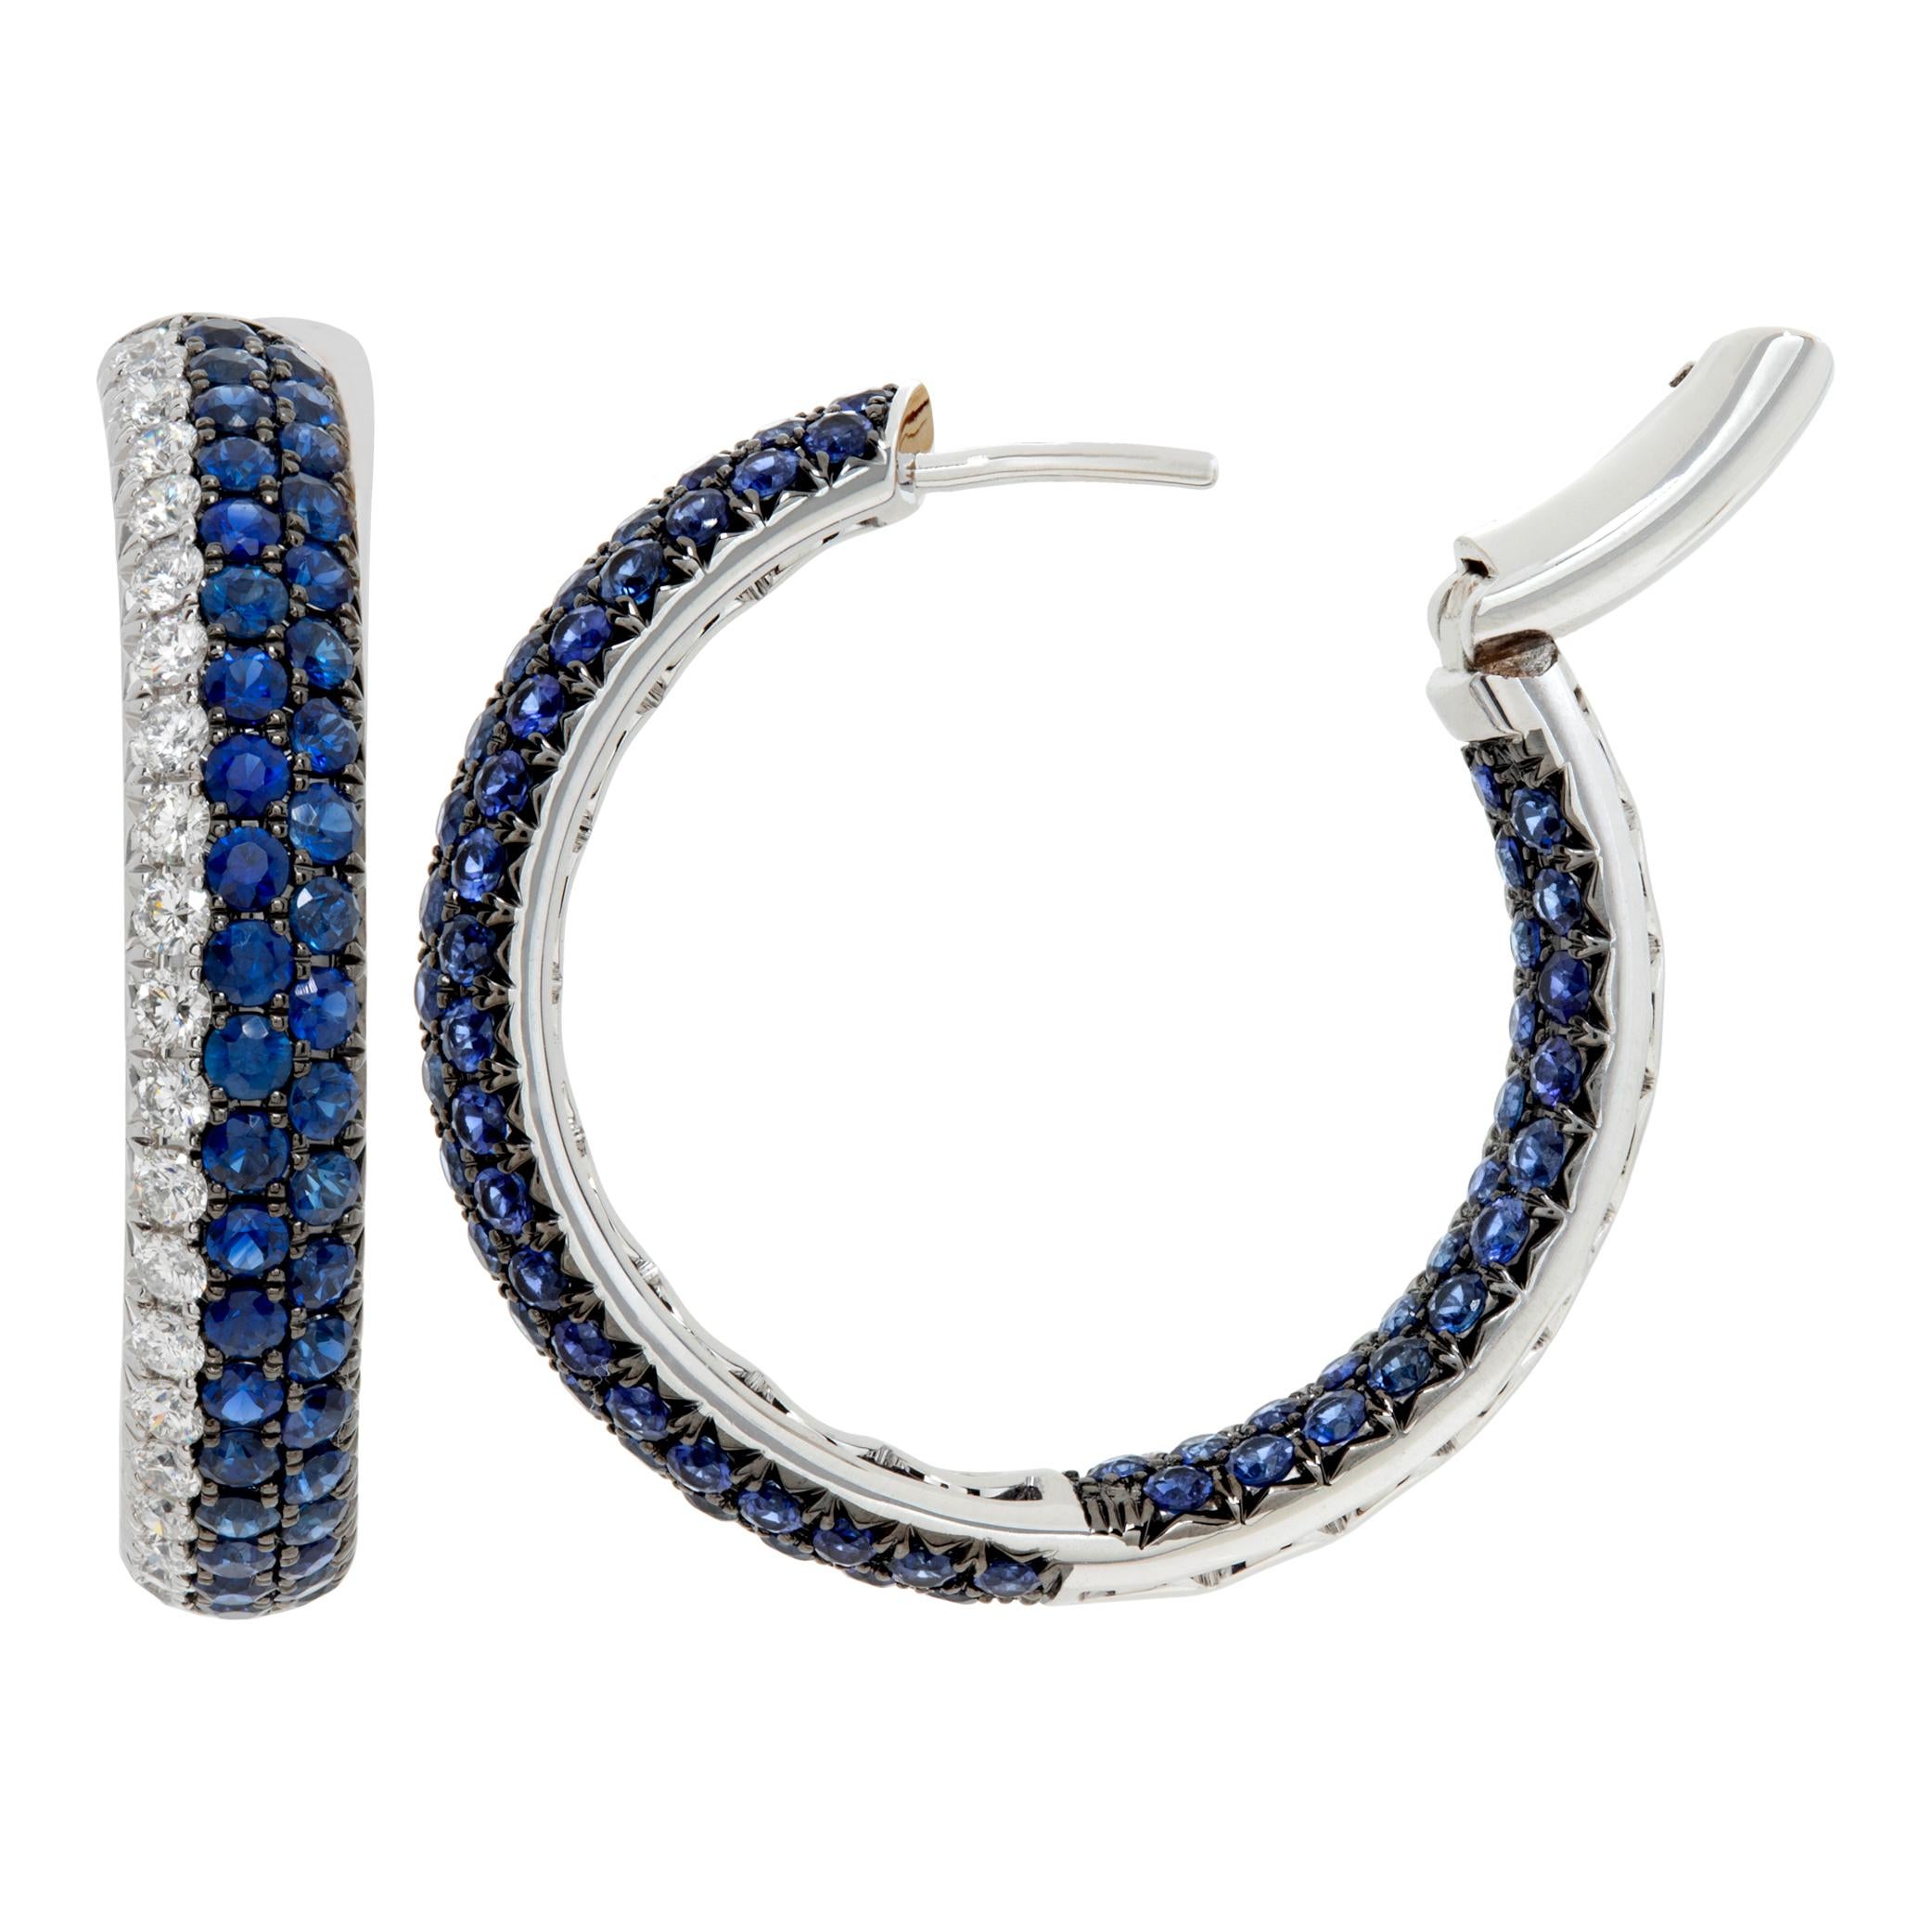 Diamond and sapphire 18k white gold hoop earrings In Excellent Condition For Sale In Surfside, FL